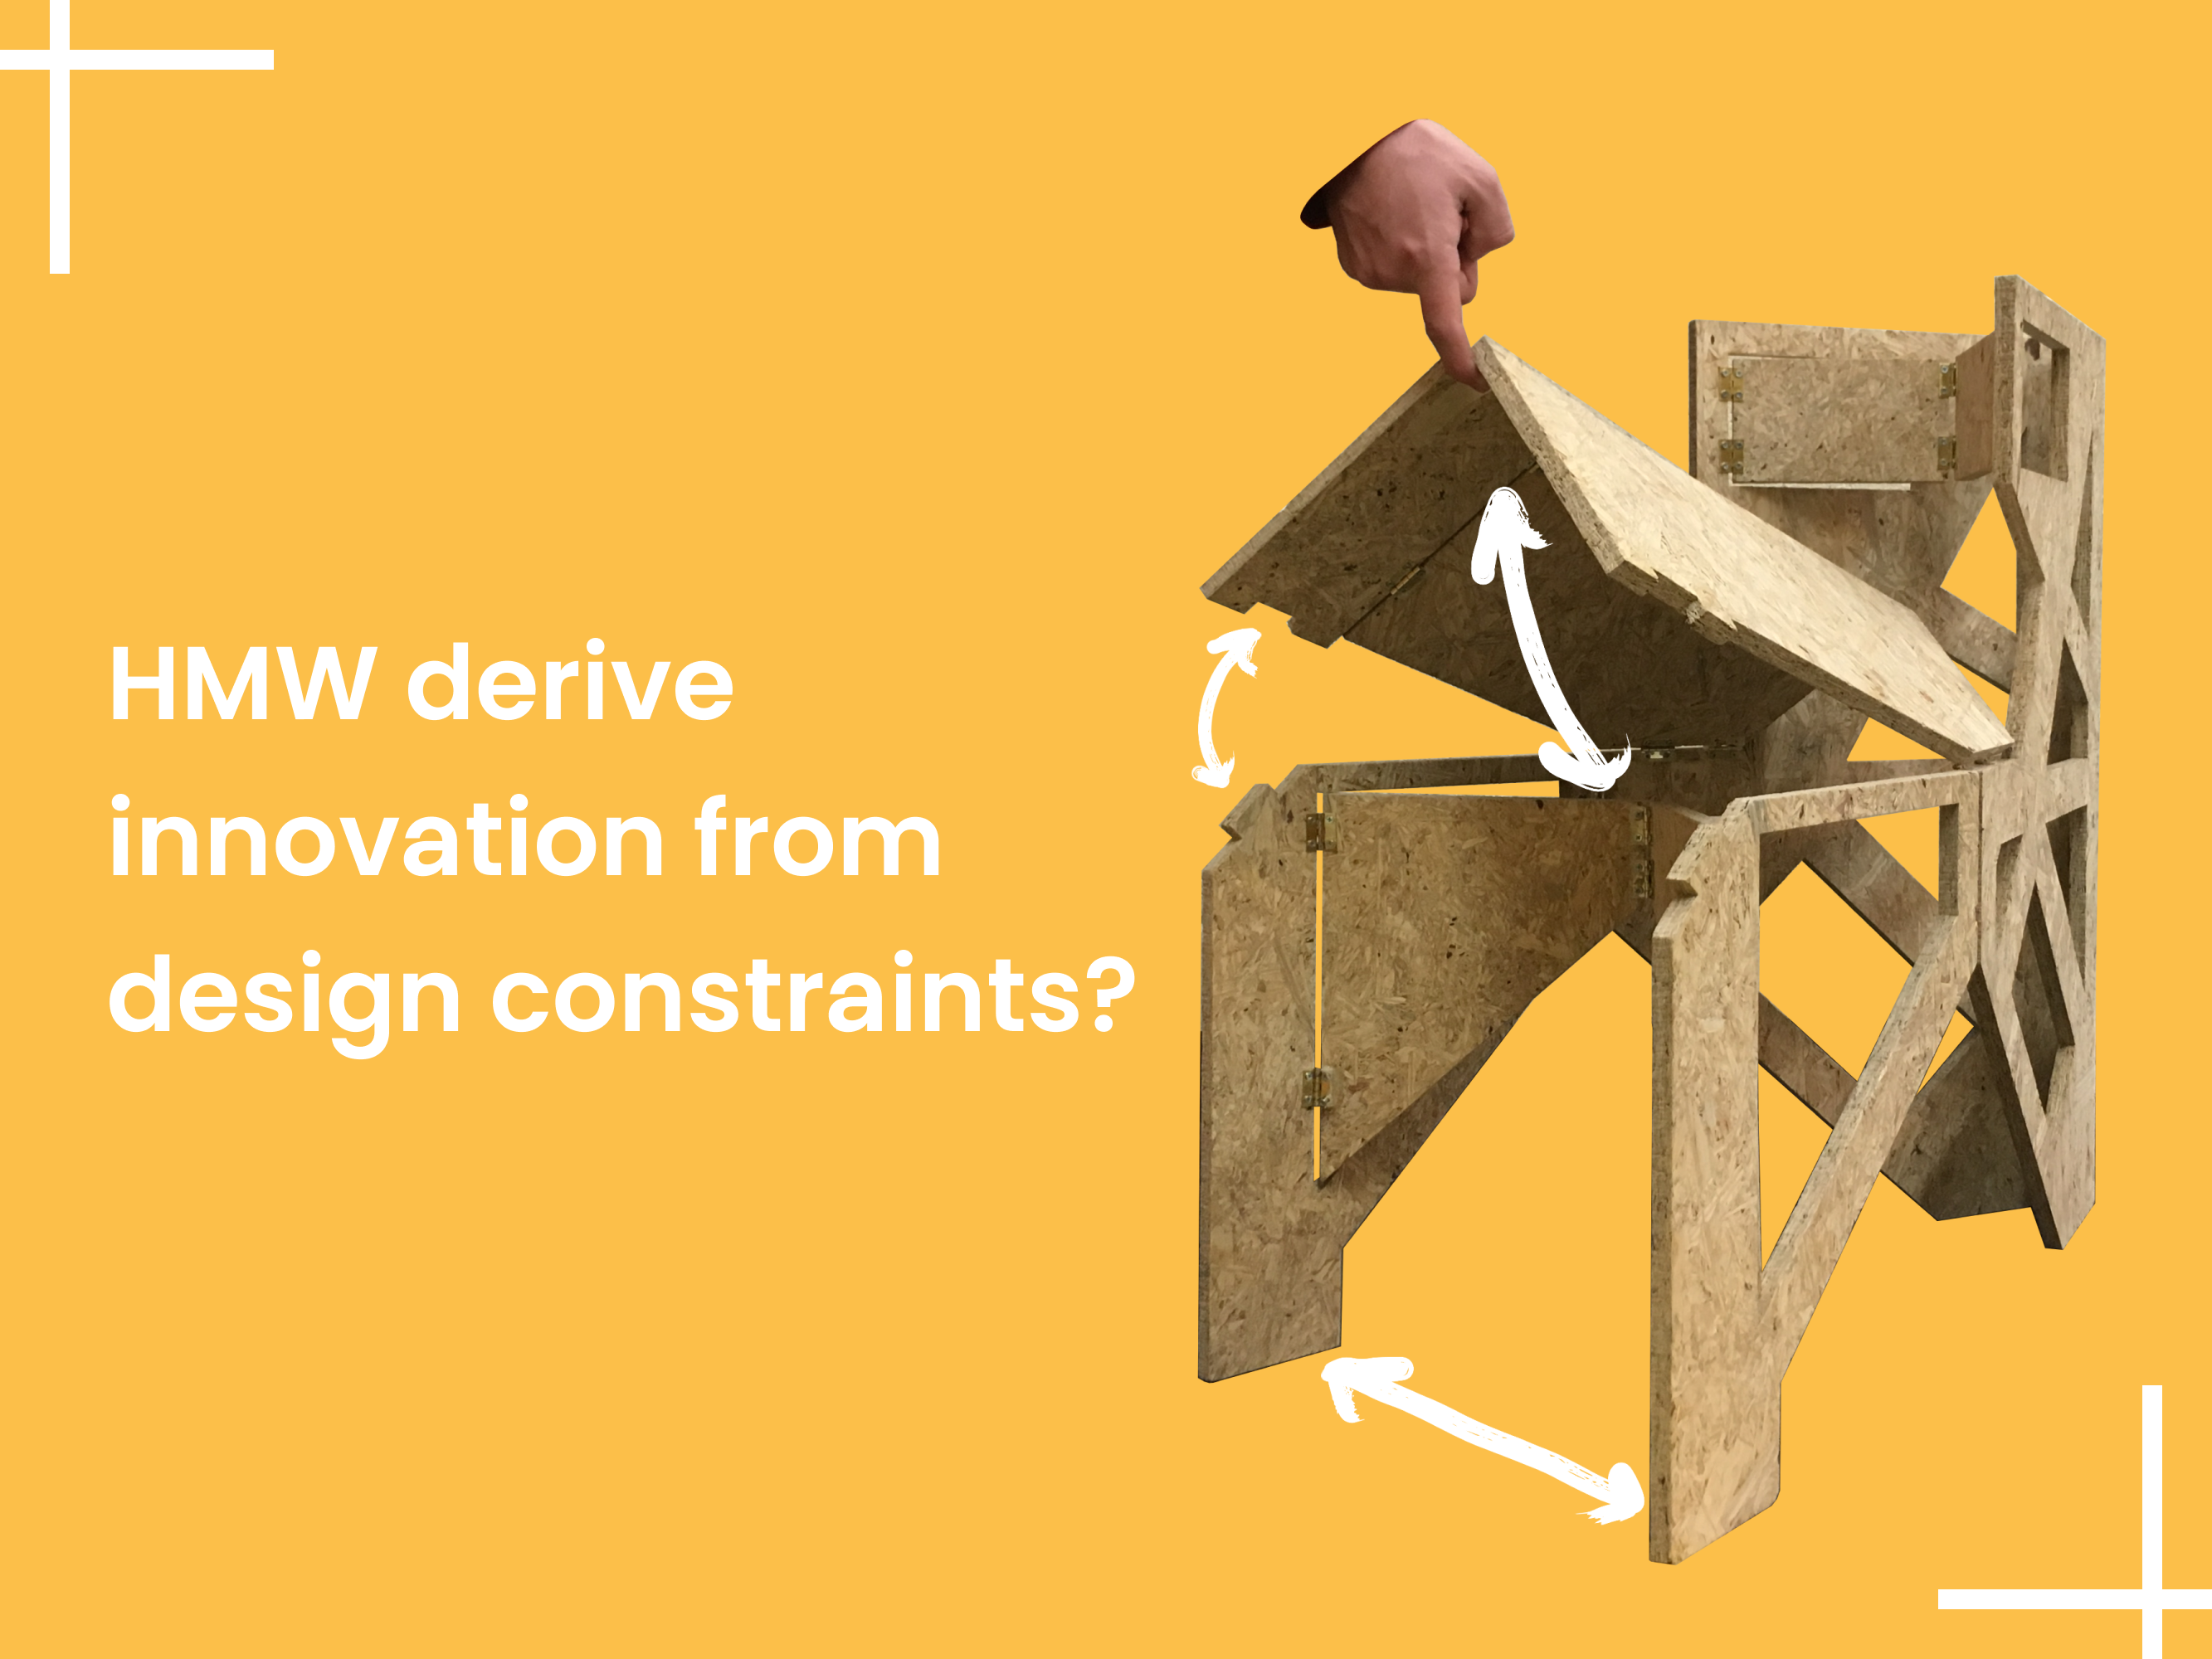 Unique design of foldable chair made of hardboard with text: 'HMW derive innovation from design constraints?'